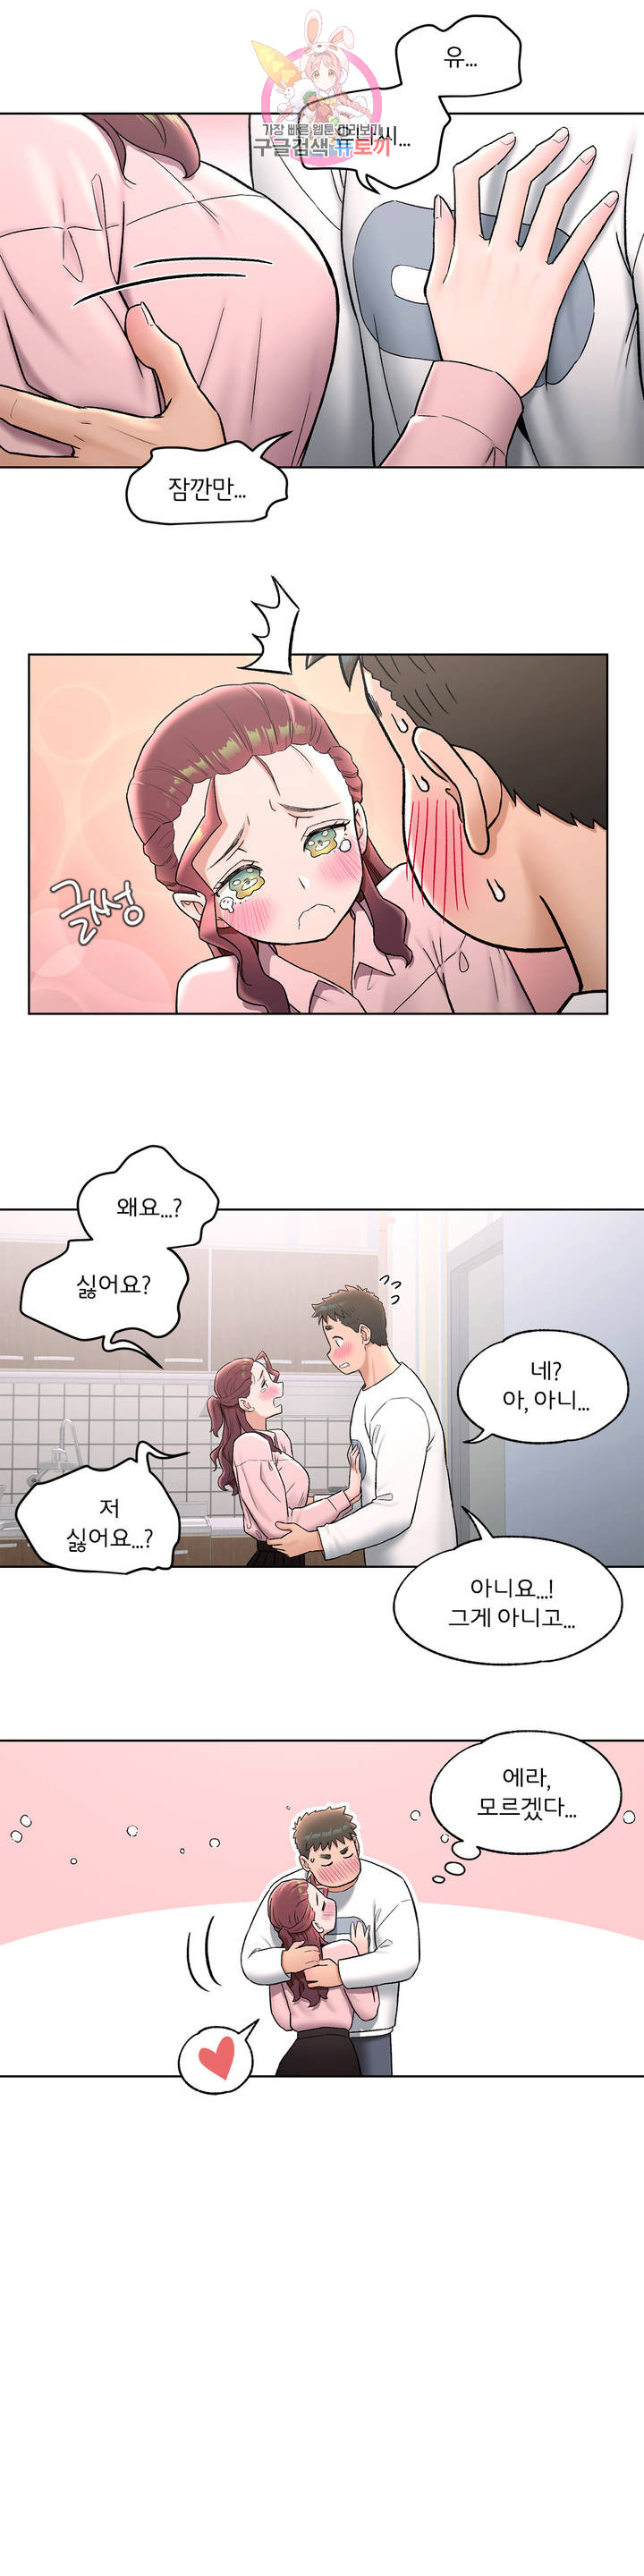 Sexercise Raw - Chapter 61 Page 3